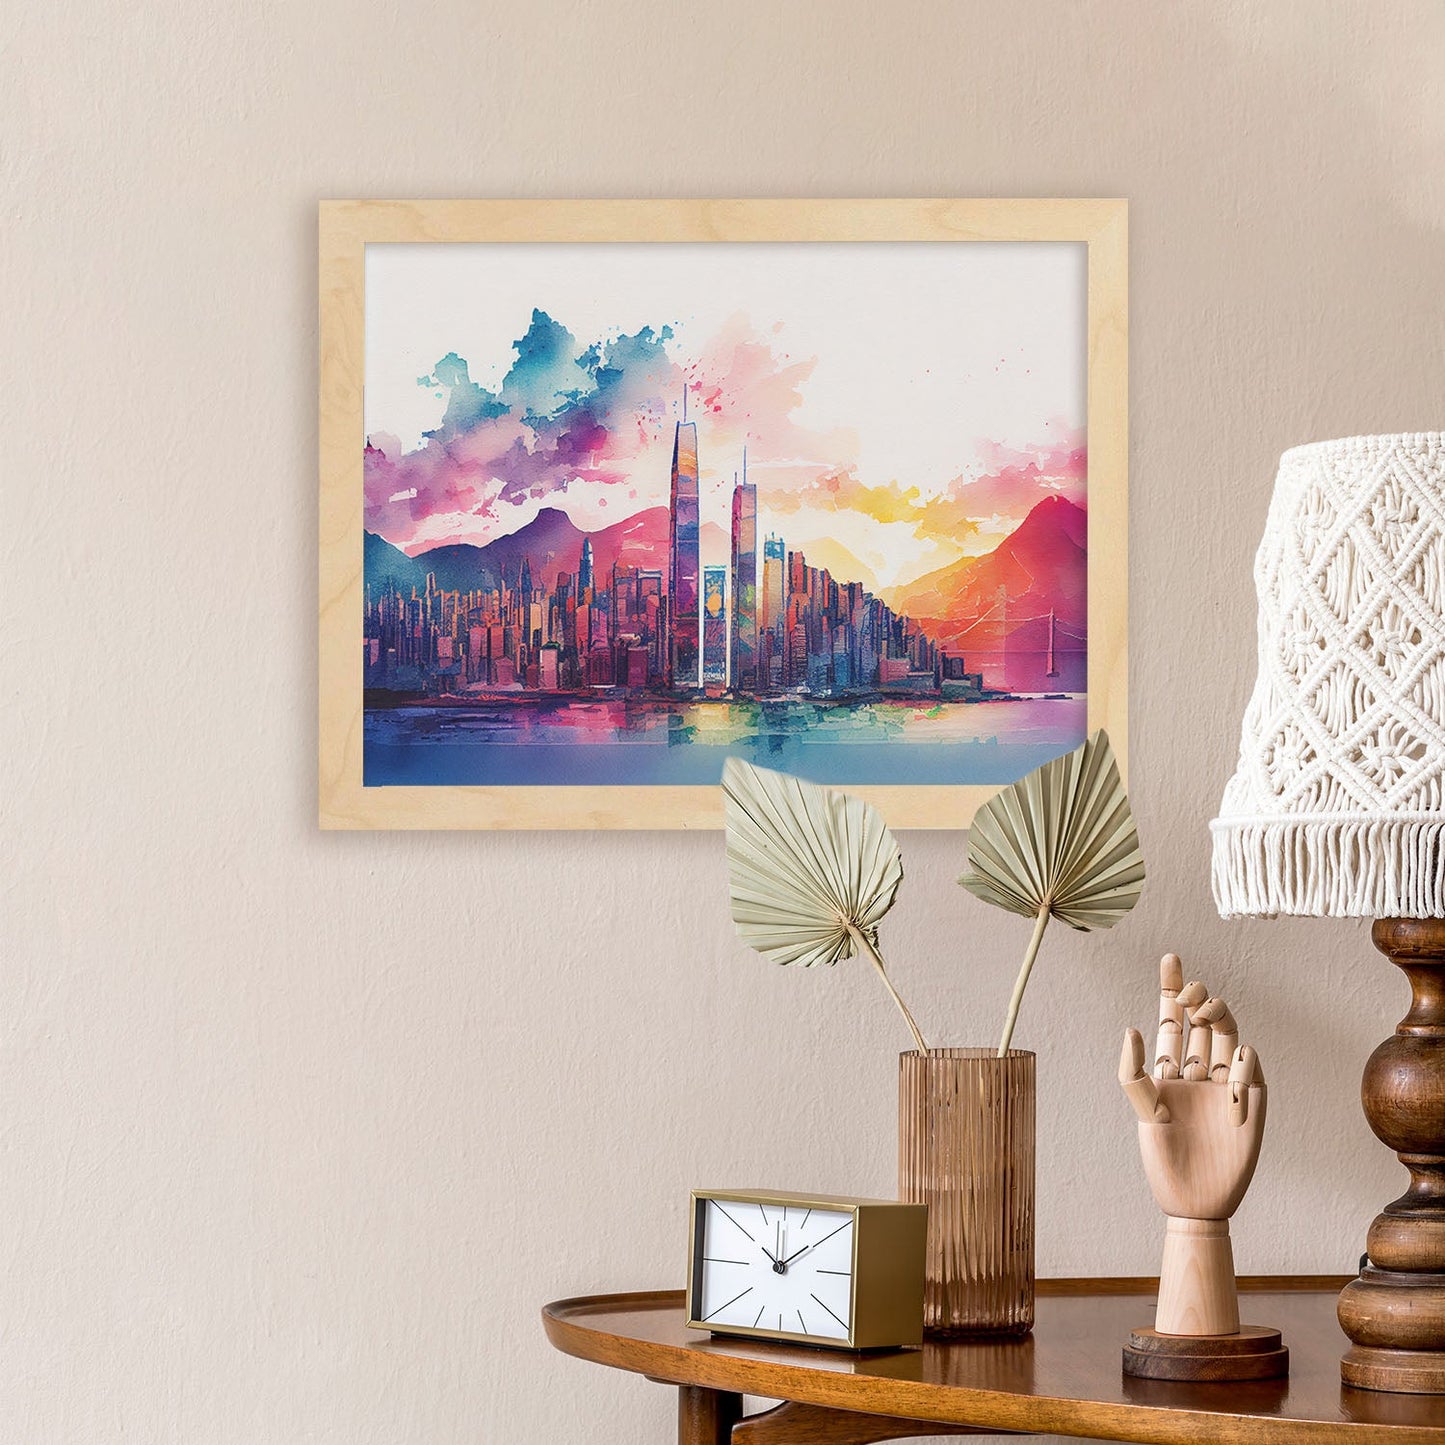 Nacnic watercolor of a skyline of the city of Hong Kong_3. Aesthetic Wall Art Prints for Bedroom or Living Room Design.